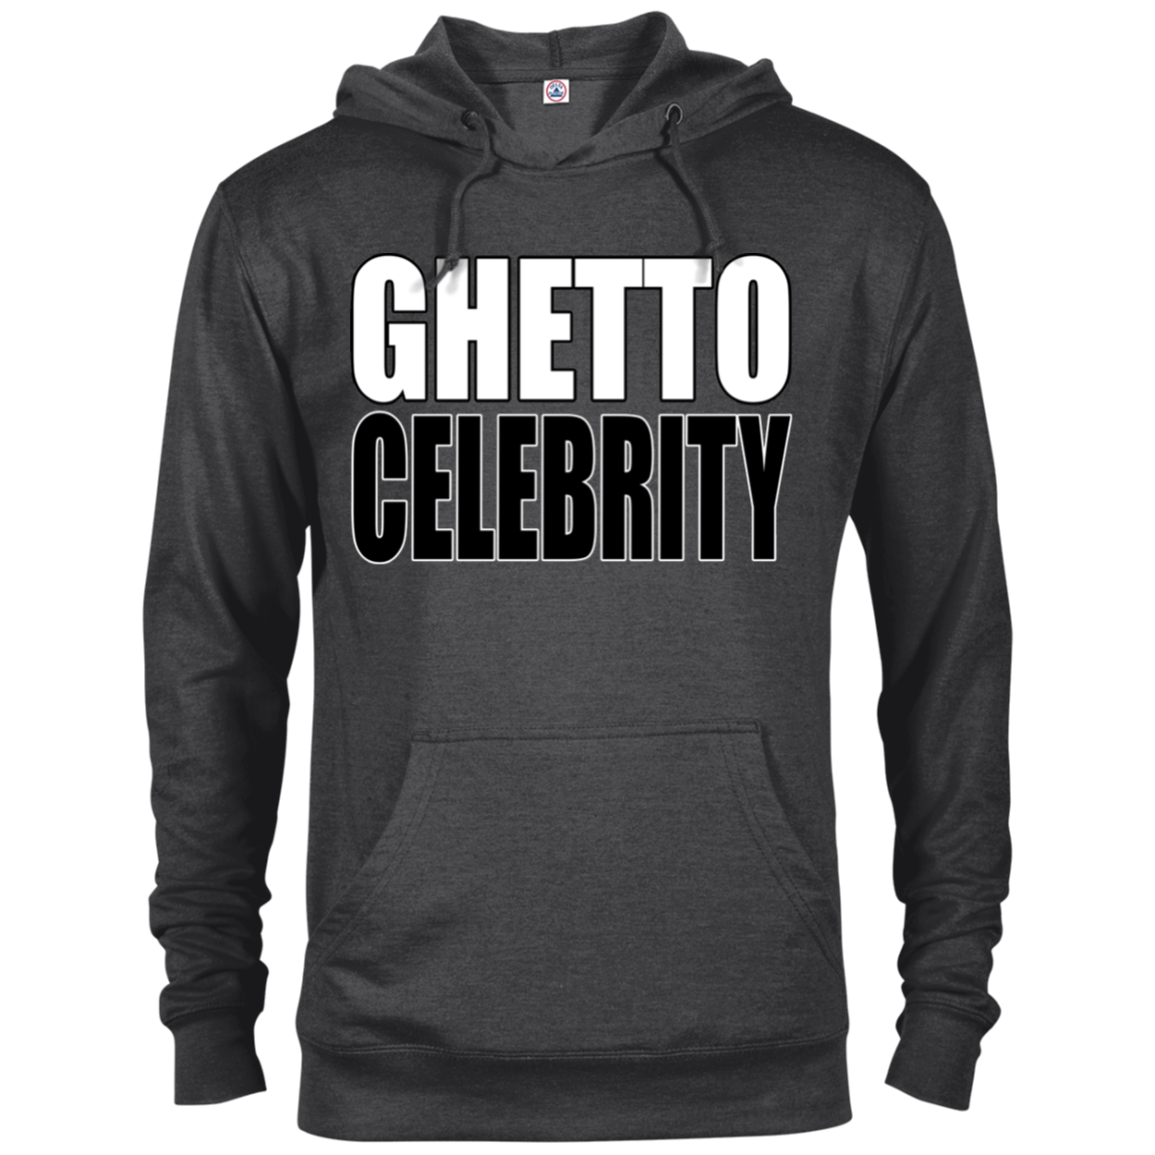 Ghetto Celebrity French Terry Hoodie